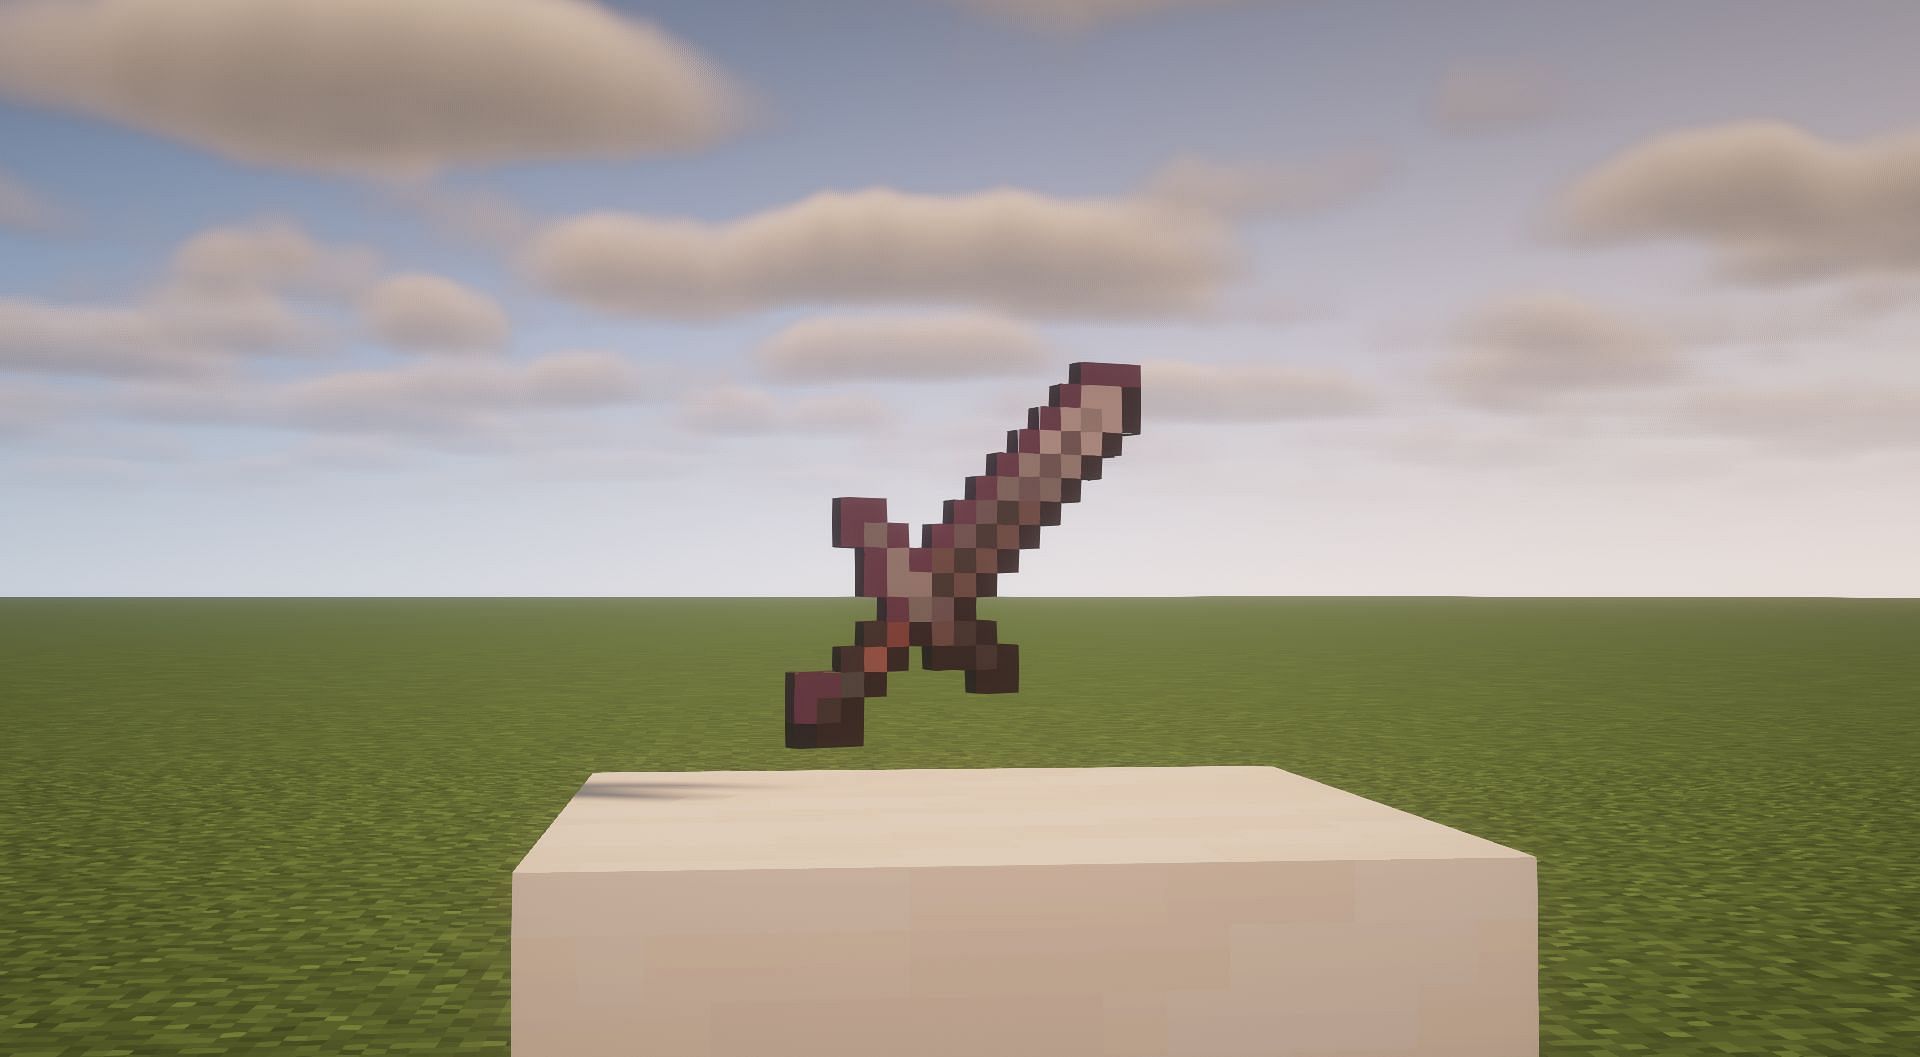 There are many enchantments for swords in Minecraft (Image via Mojang)